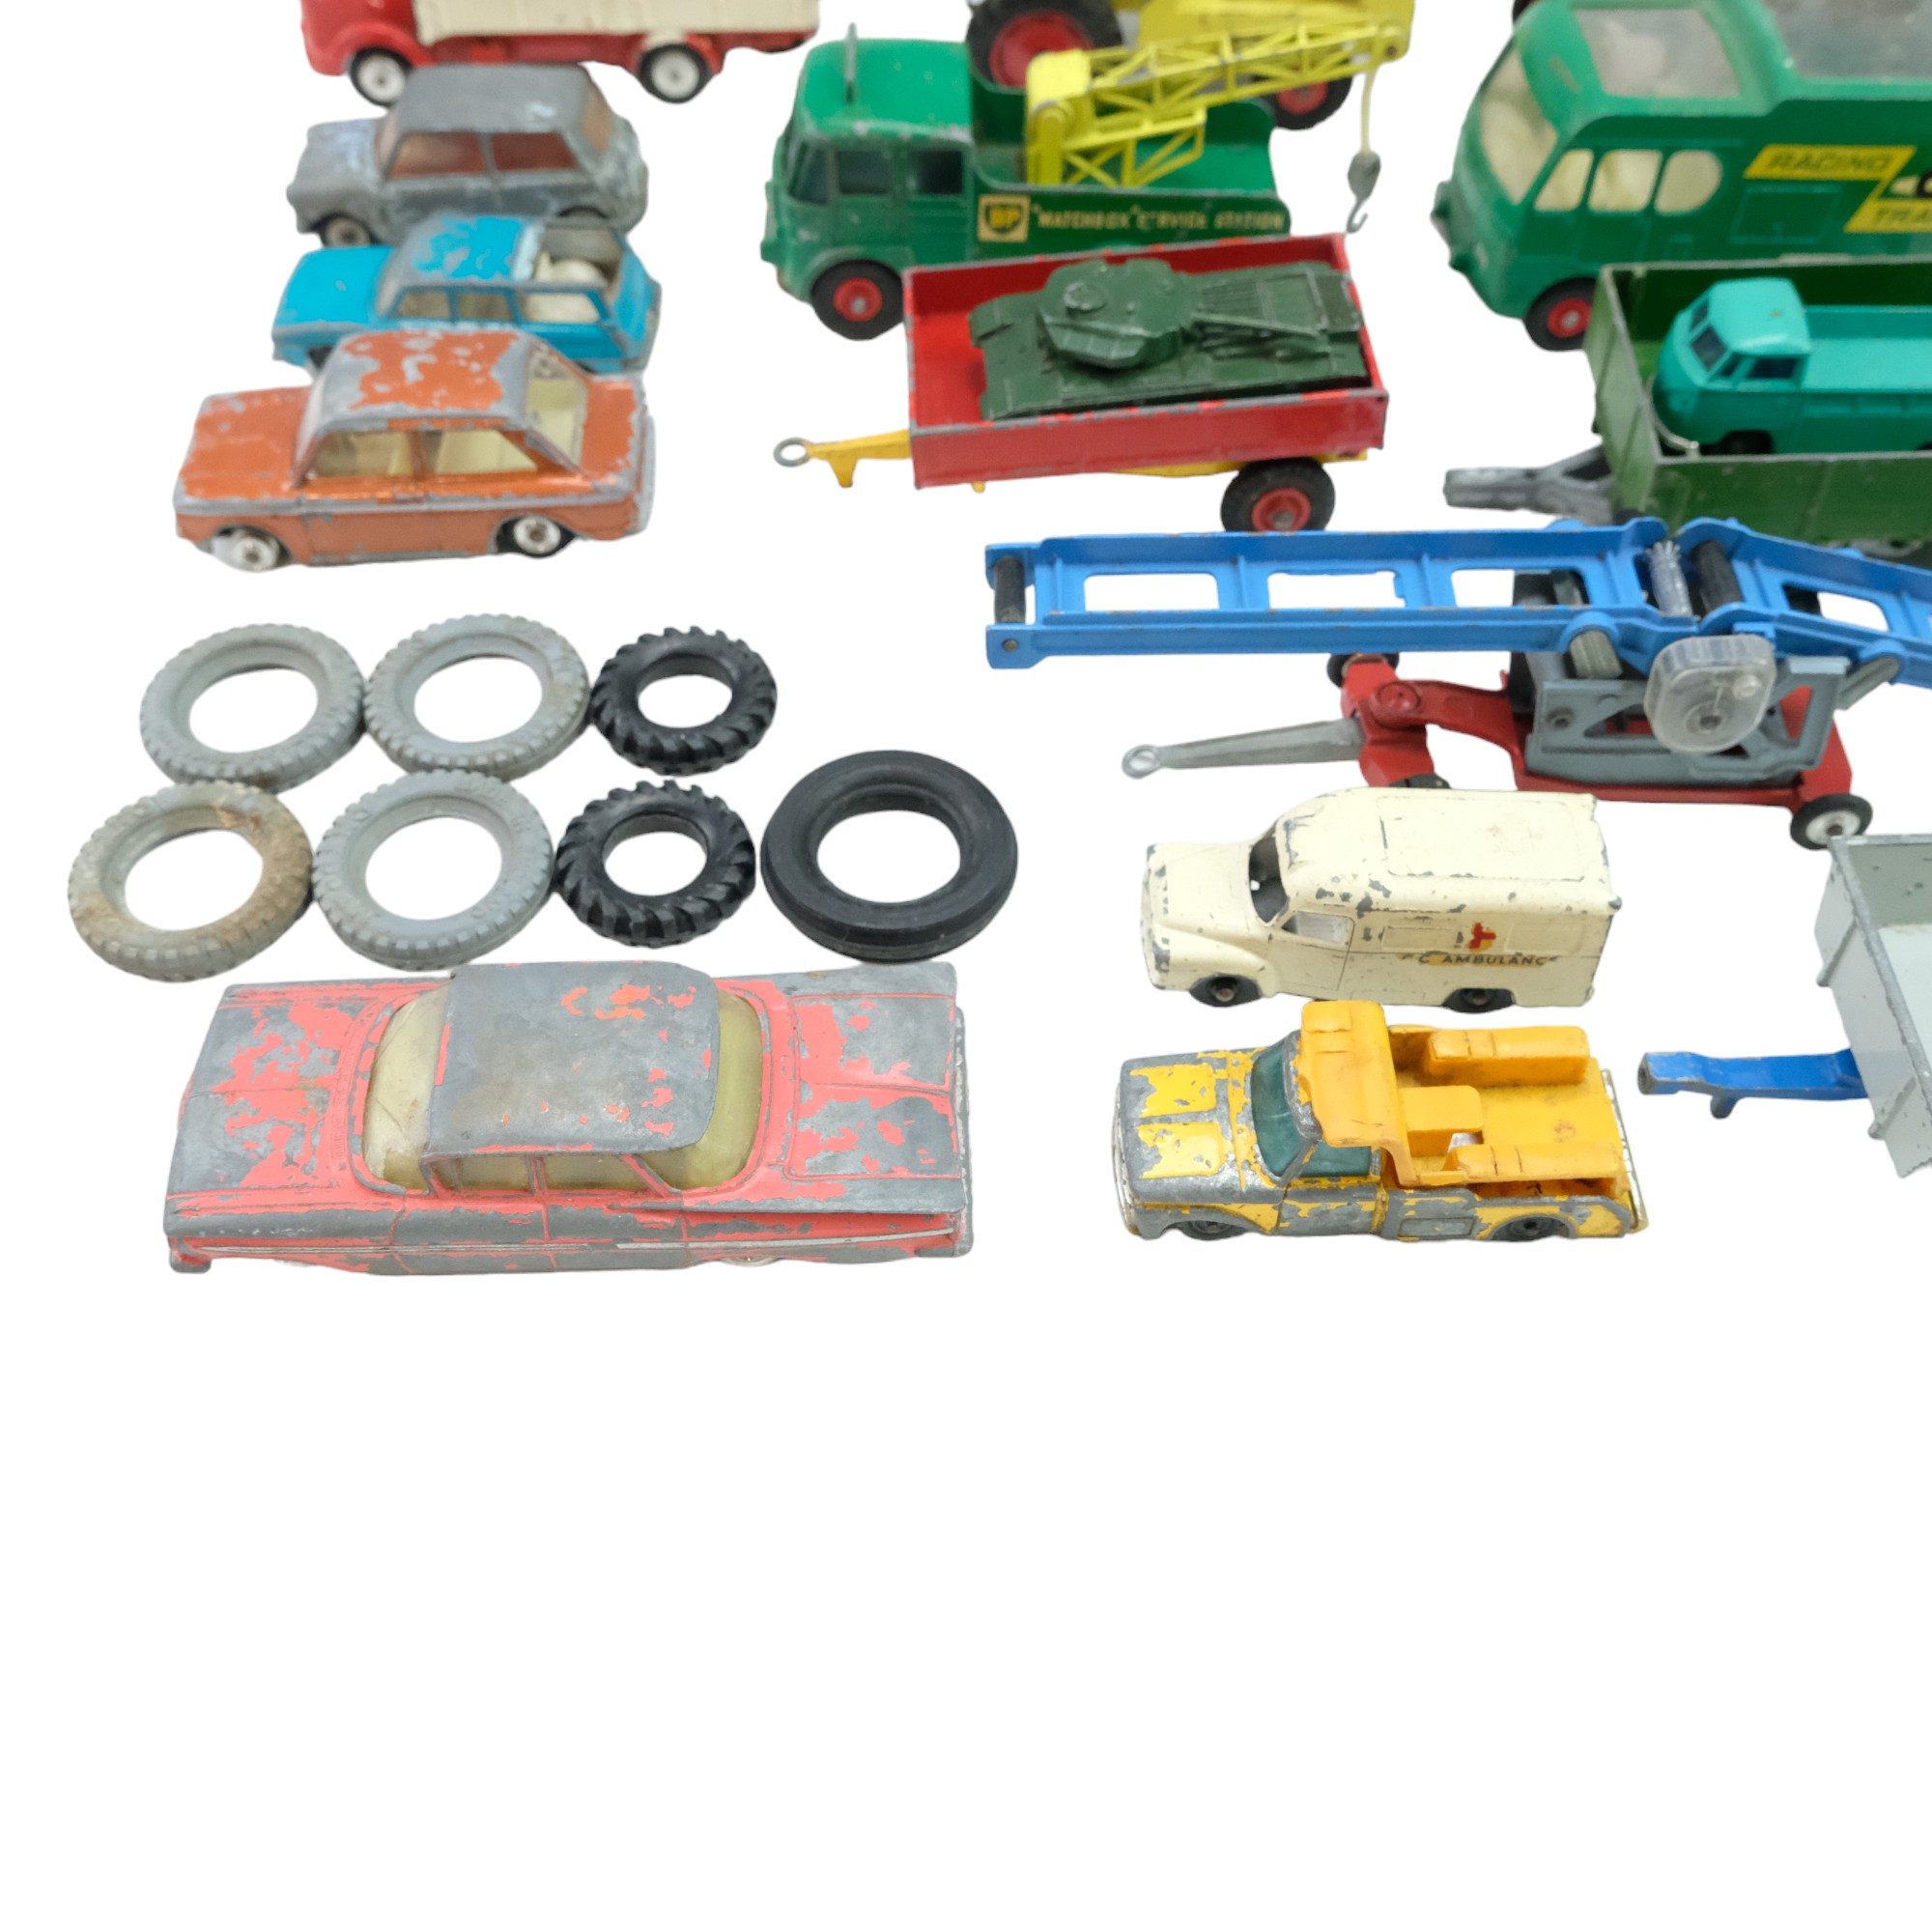 A quantity of Corgi and Matchbox diecast model cars and wagons including a racing transporter and - Image 5 of 5